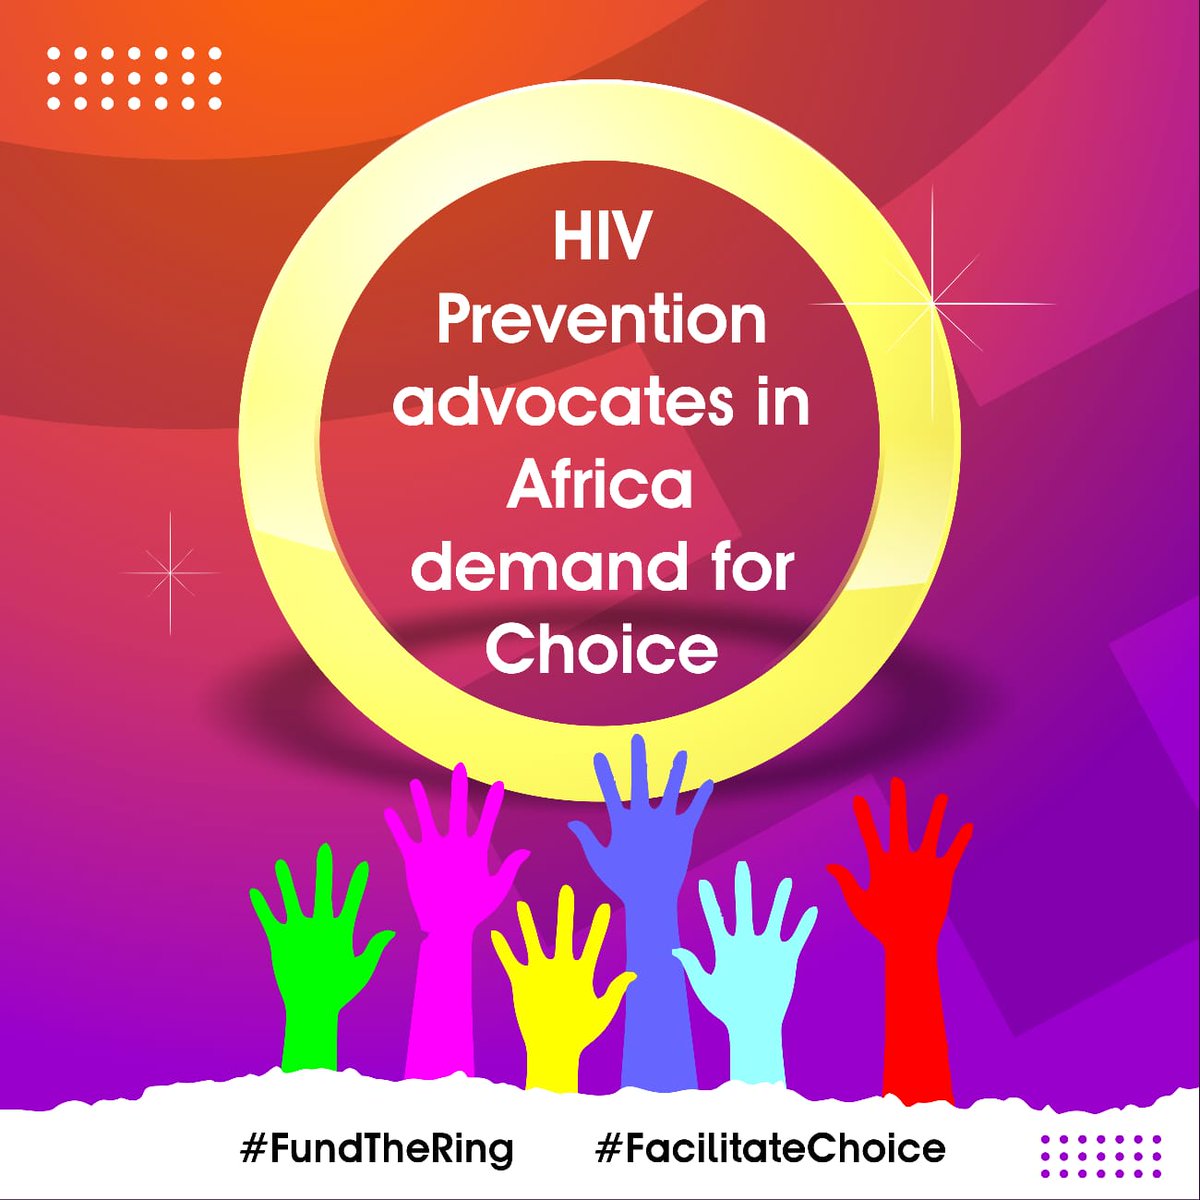 #FundTheRing #FacilitateChoice Country regulators and policymakers have an obligation to help ensure the best range of prevention options for their constituents are made available.@JNkengasong @PEPFAR @Winnie_Byanyima @USAID @USAIDEastAfrica @AfricaCDC @WHO @GlobalFund